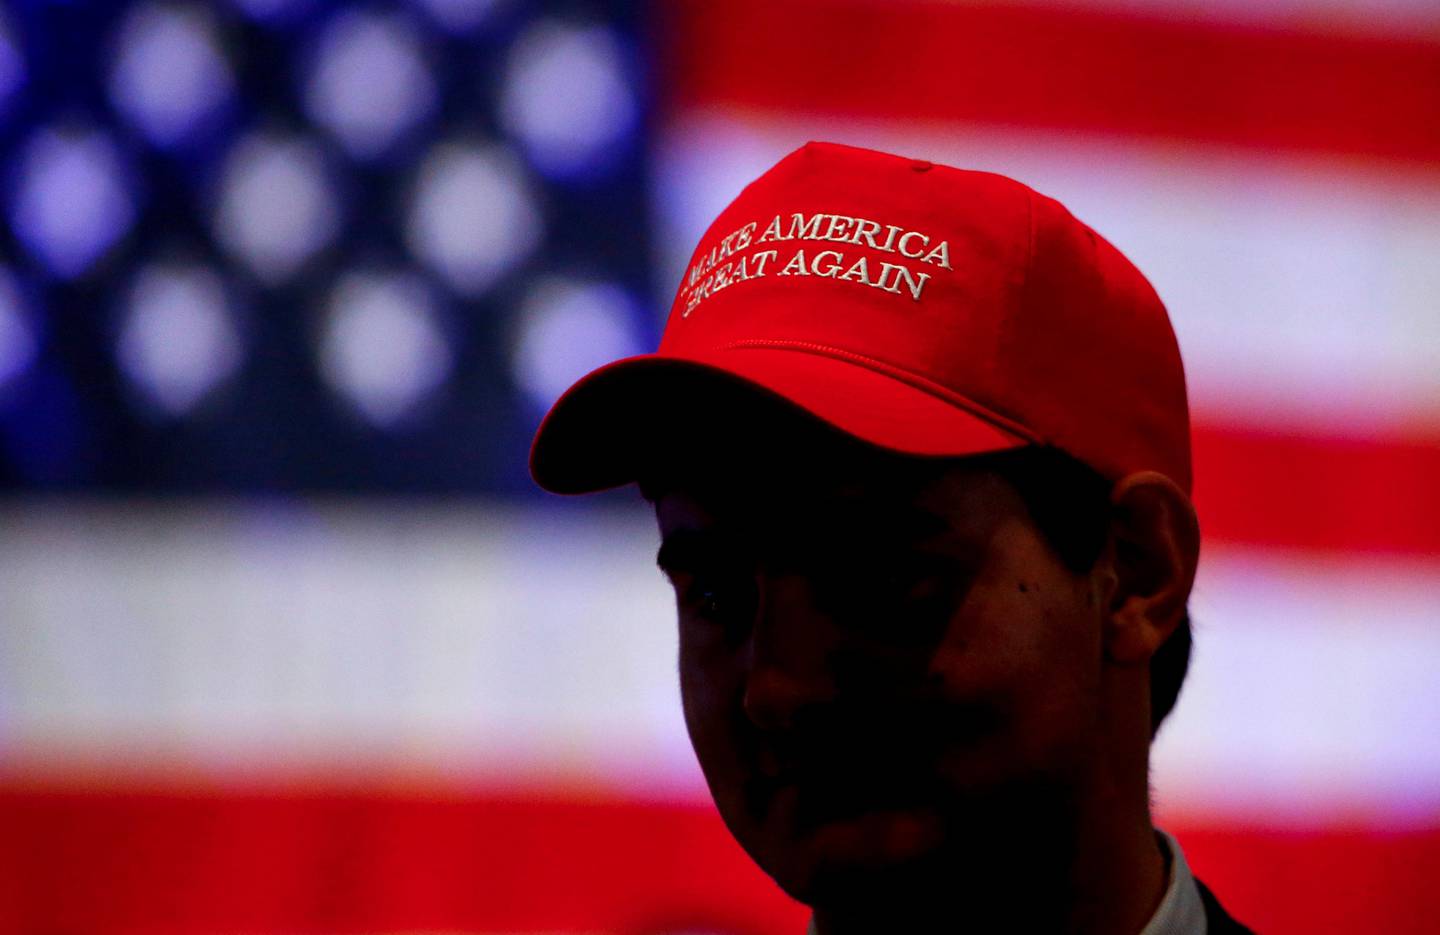 Oliver Lester, of Montgomery, wears a hat with President President Donald Trump's campaign slogan as he watches results come in for Gov. Kay Ivey at a watch party, Tuesday, Nov. 6, 2018, in Montgomery, Ala. (AP Photo/Butch Dill)